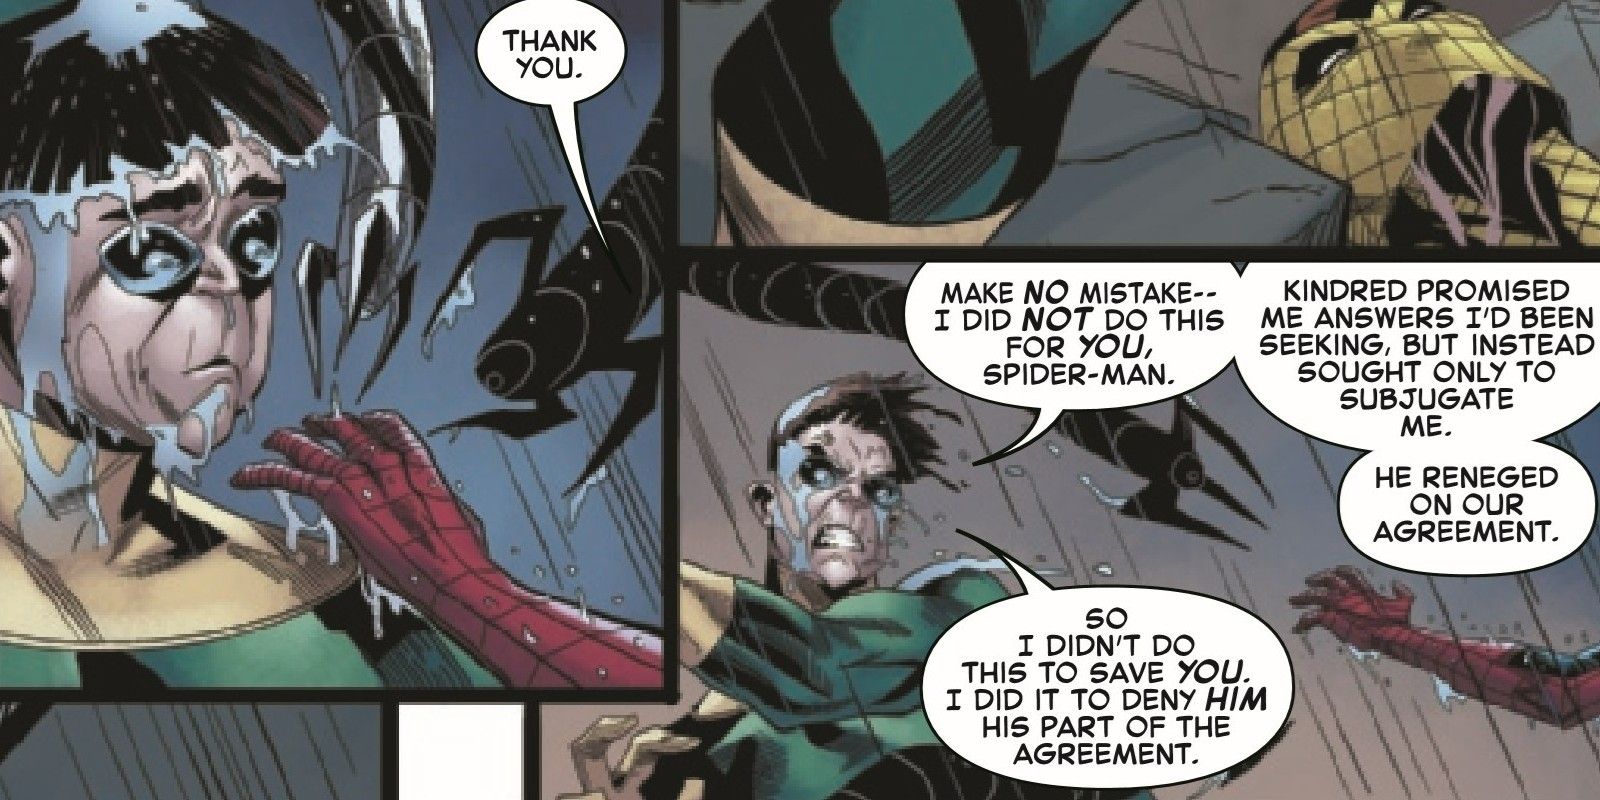 Doctor Octopus tells Spider-Man that he didn't turn on Kindred for him in Sinister War #4